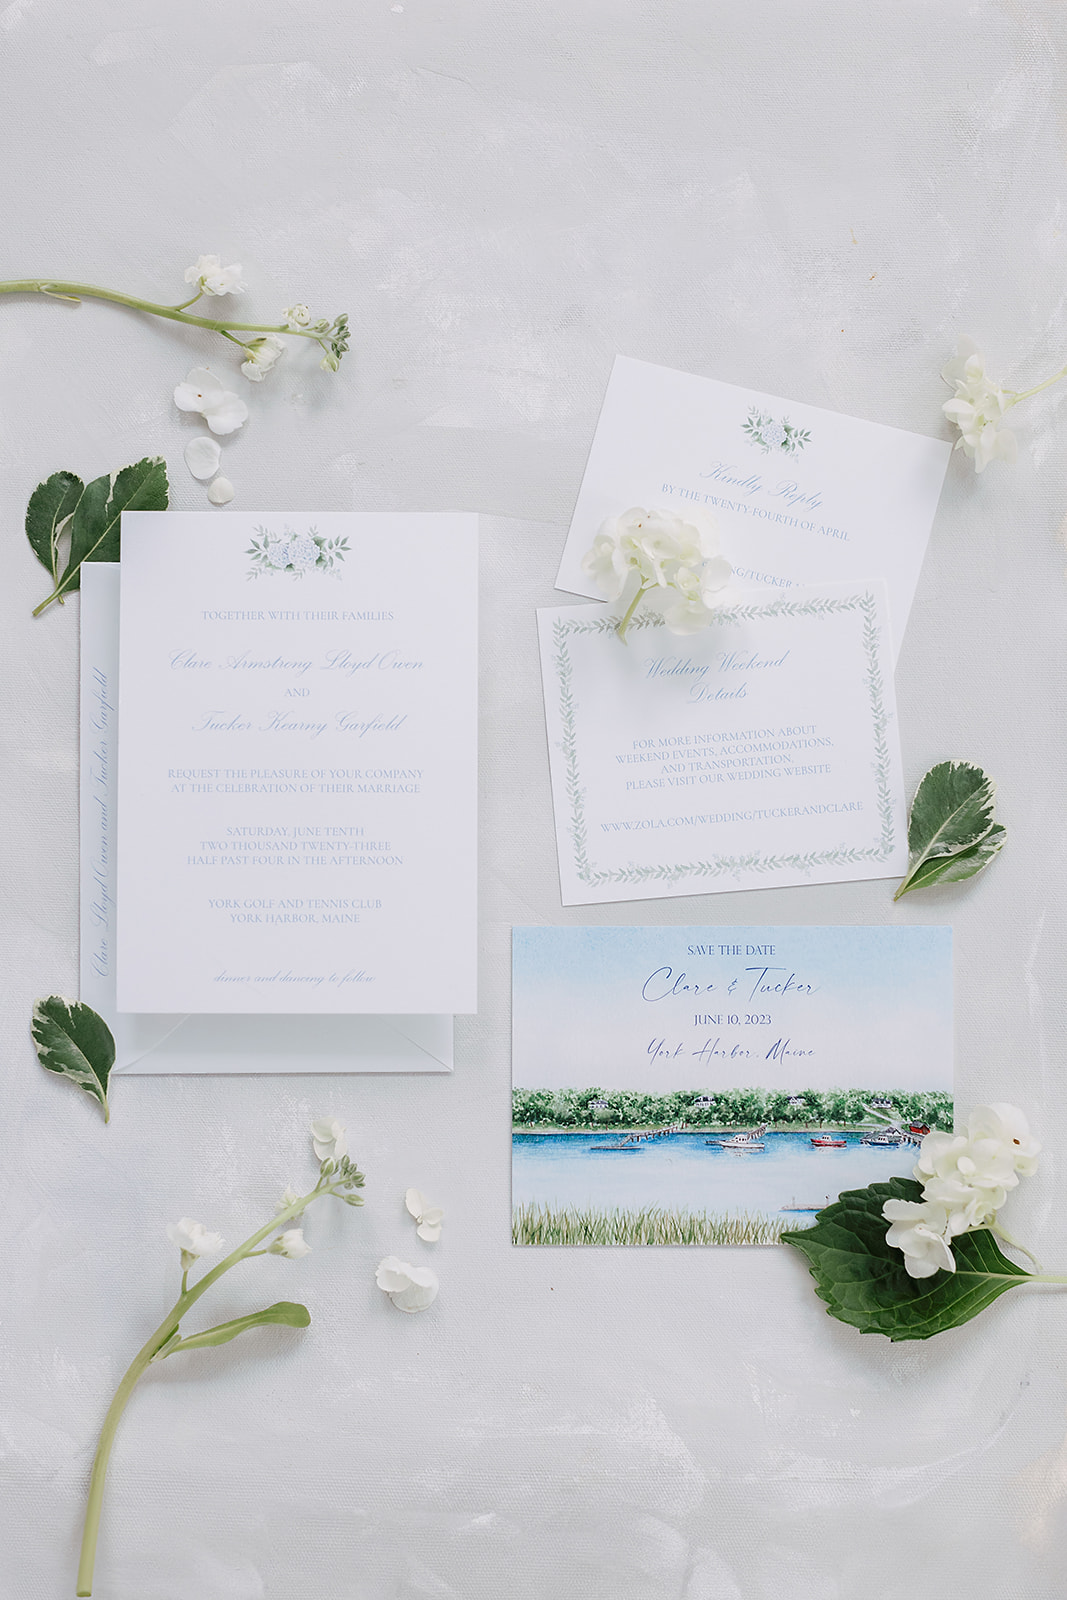 Layflat Wedding invitation suite by Emma Garfield  featuring elegant calligraphy and coastal details.